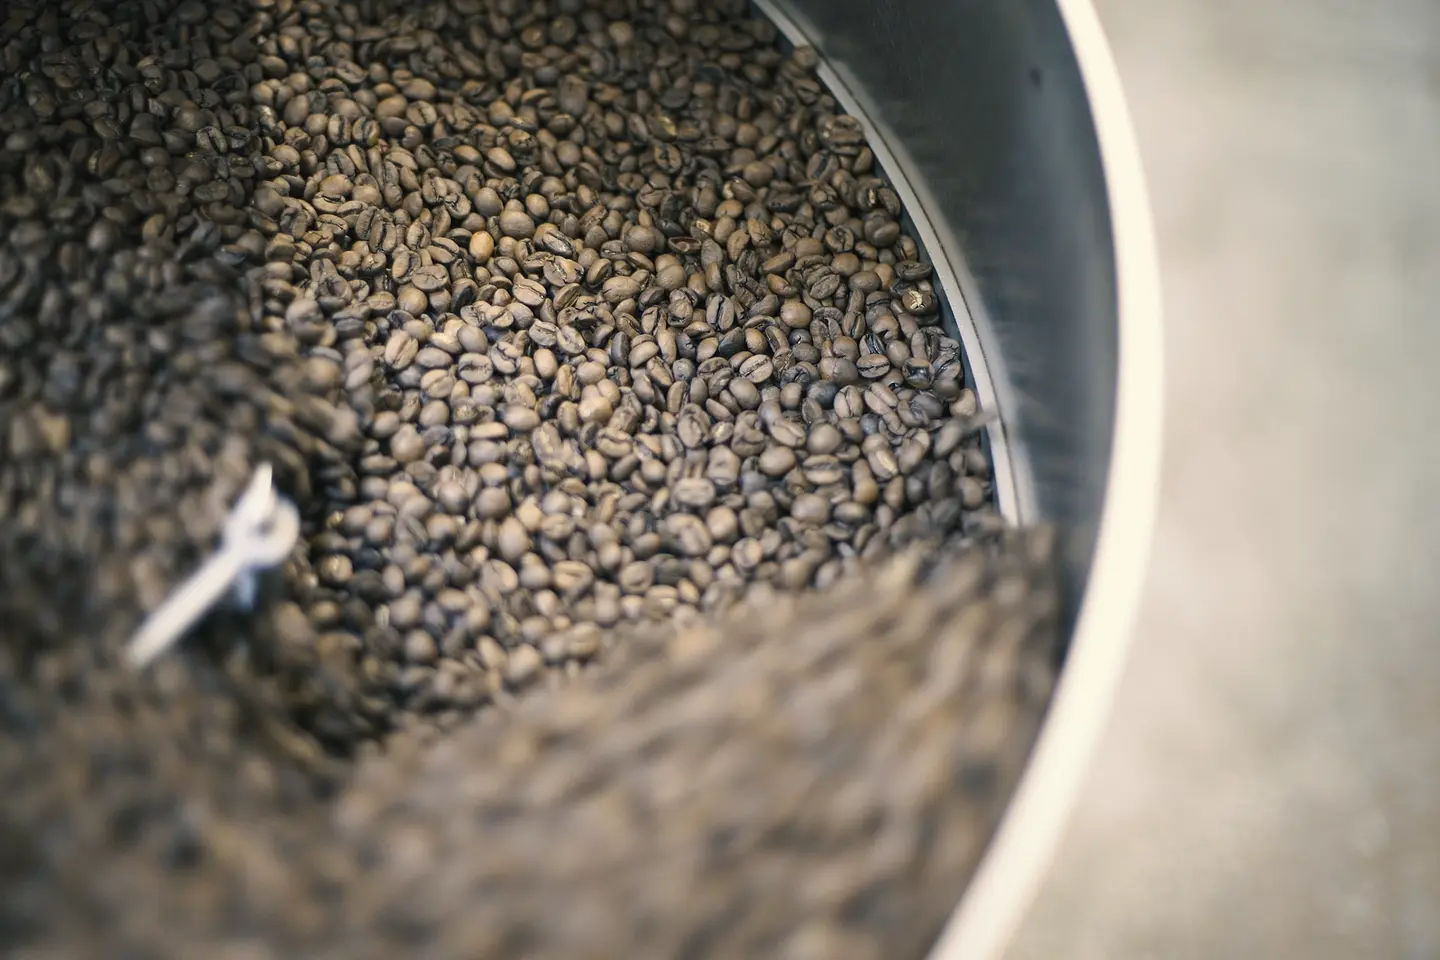 How a boutique roastery uses digital tools